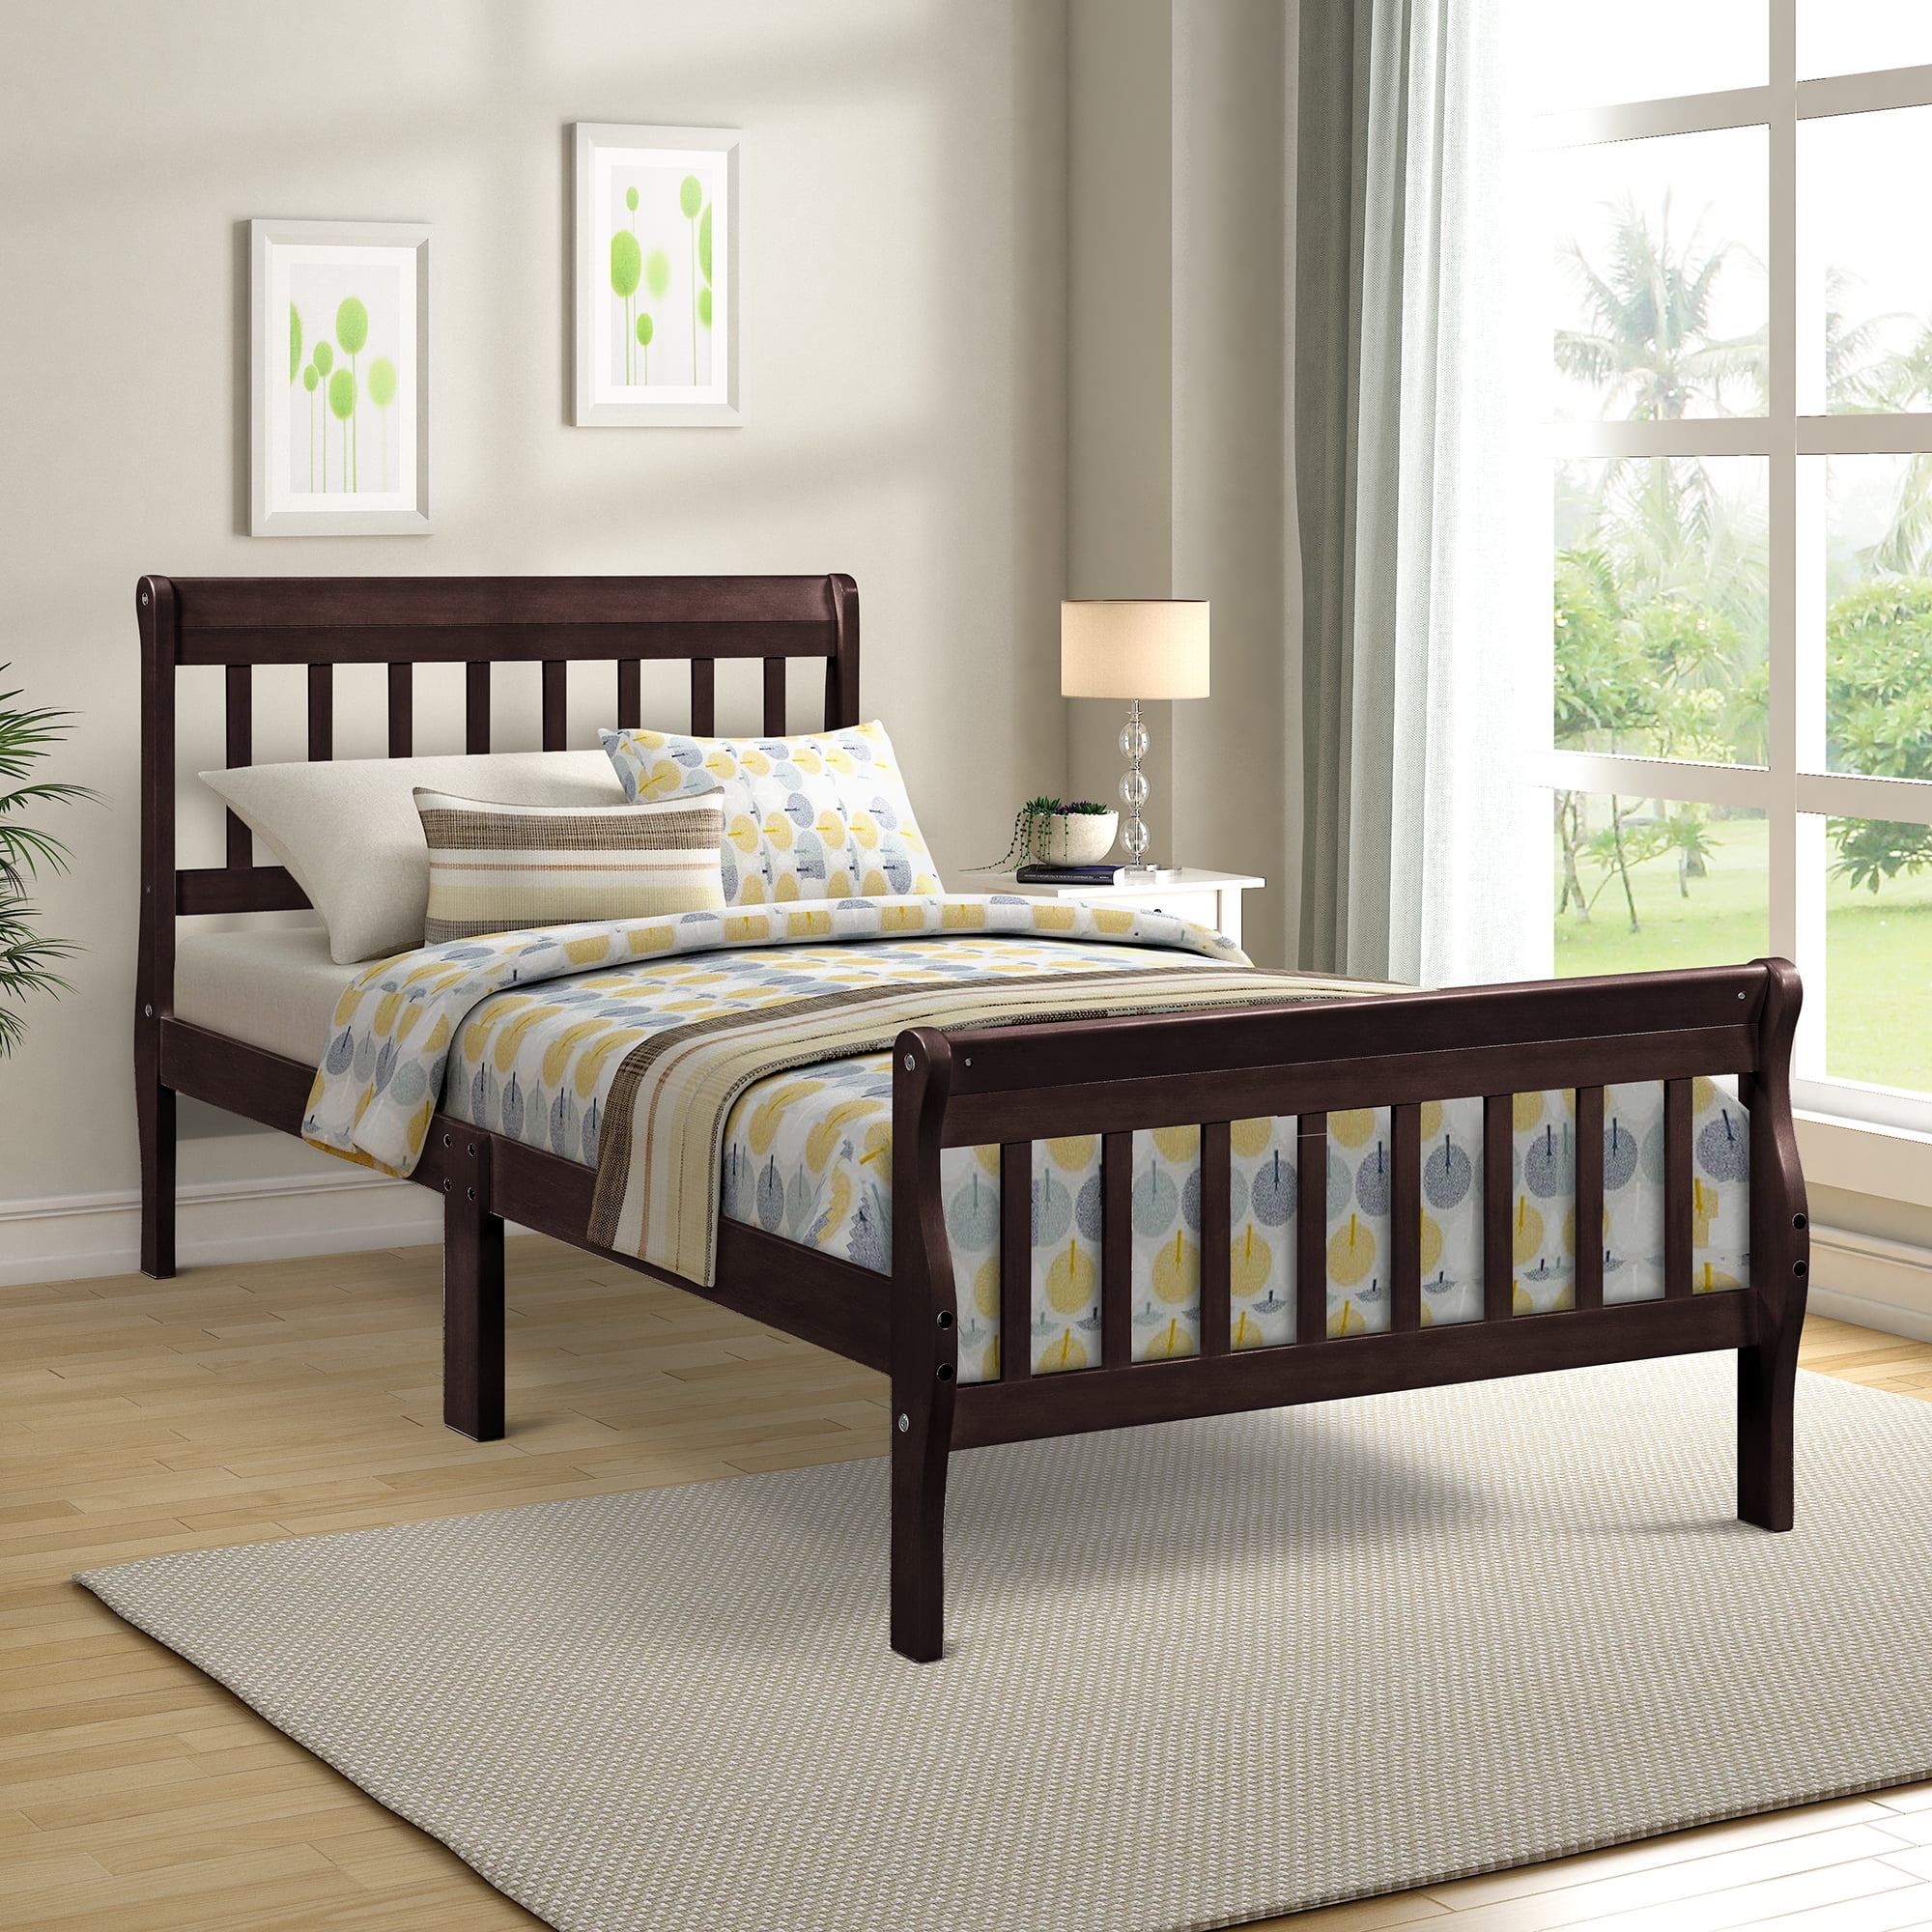 Details about   Queen King Full Twin Size Bed Frame 14" In Folding Platform Mattress Foundation